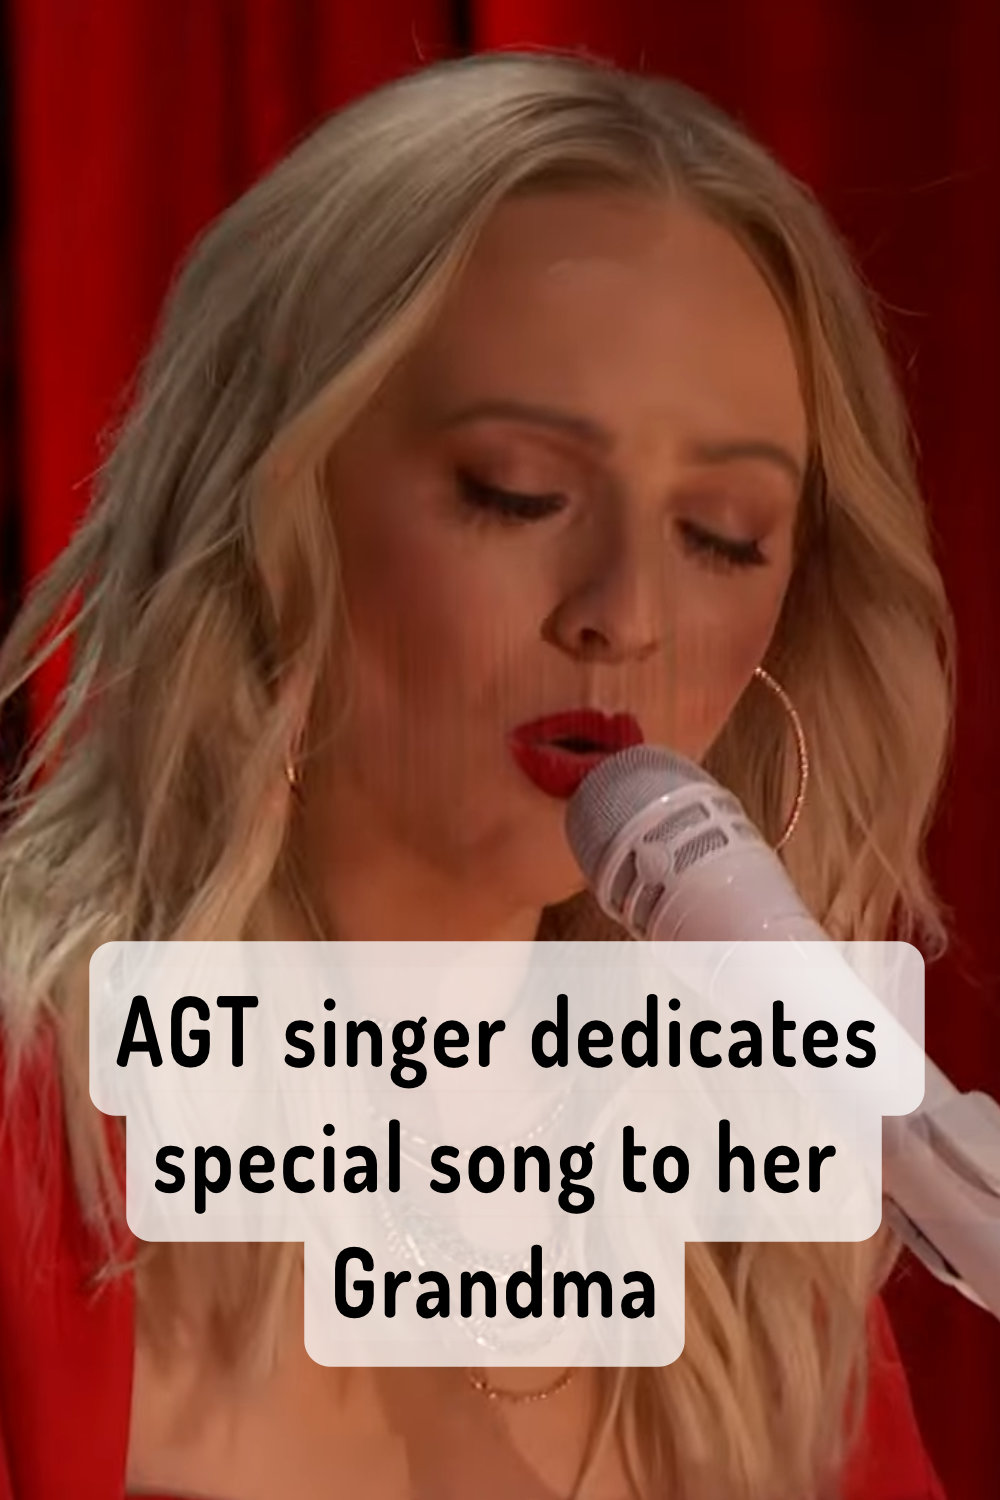 AGT singer dedicates special song to her Grandma